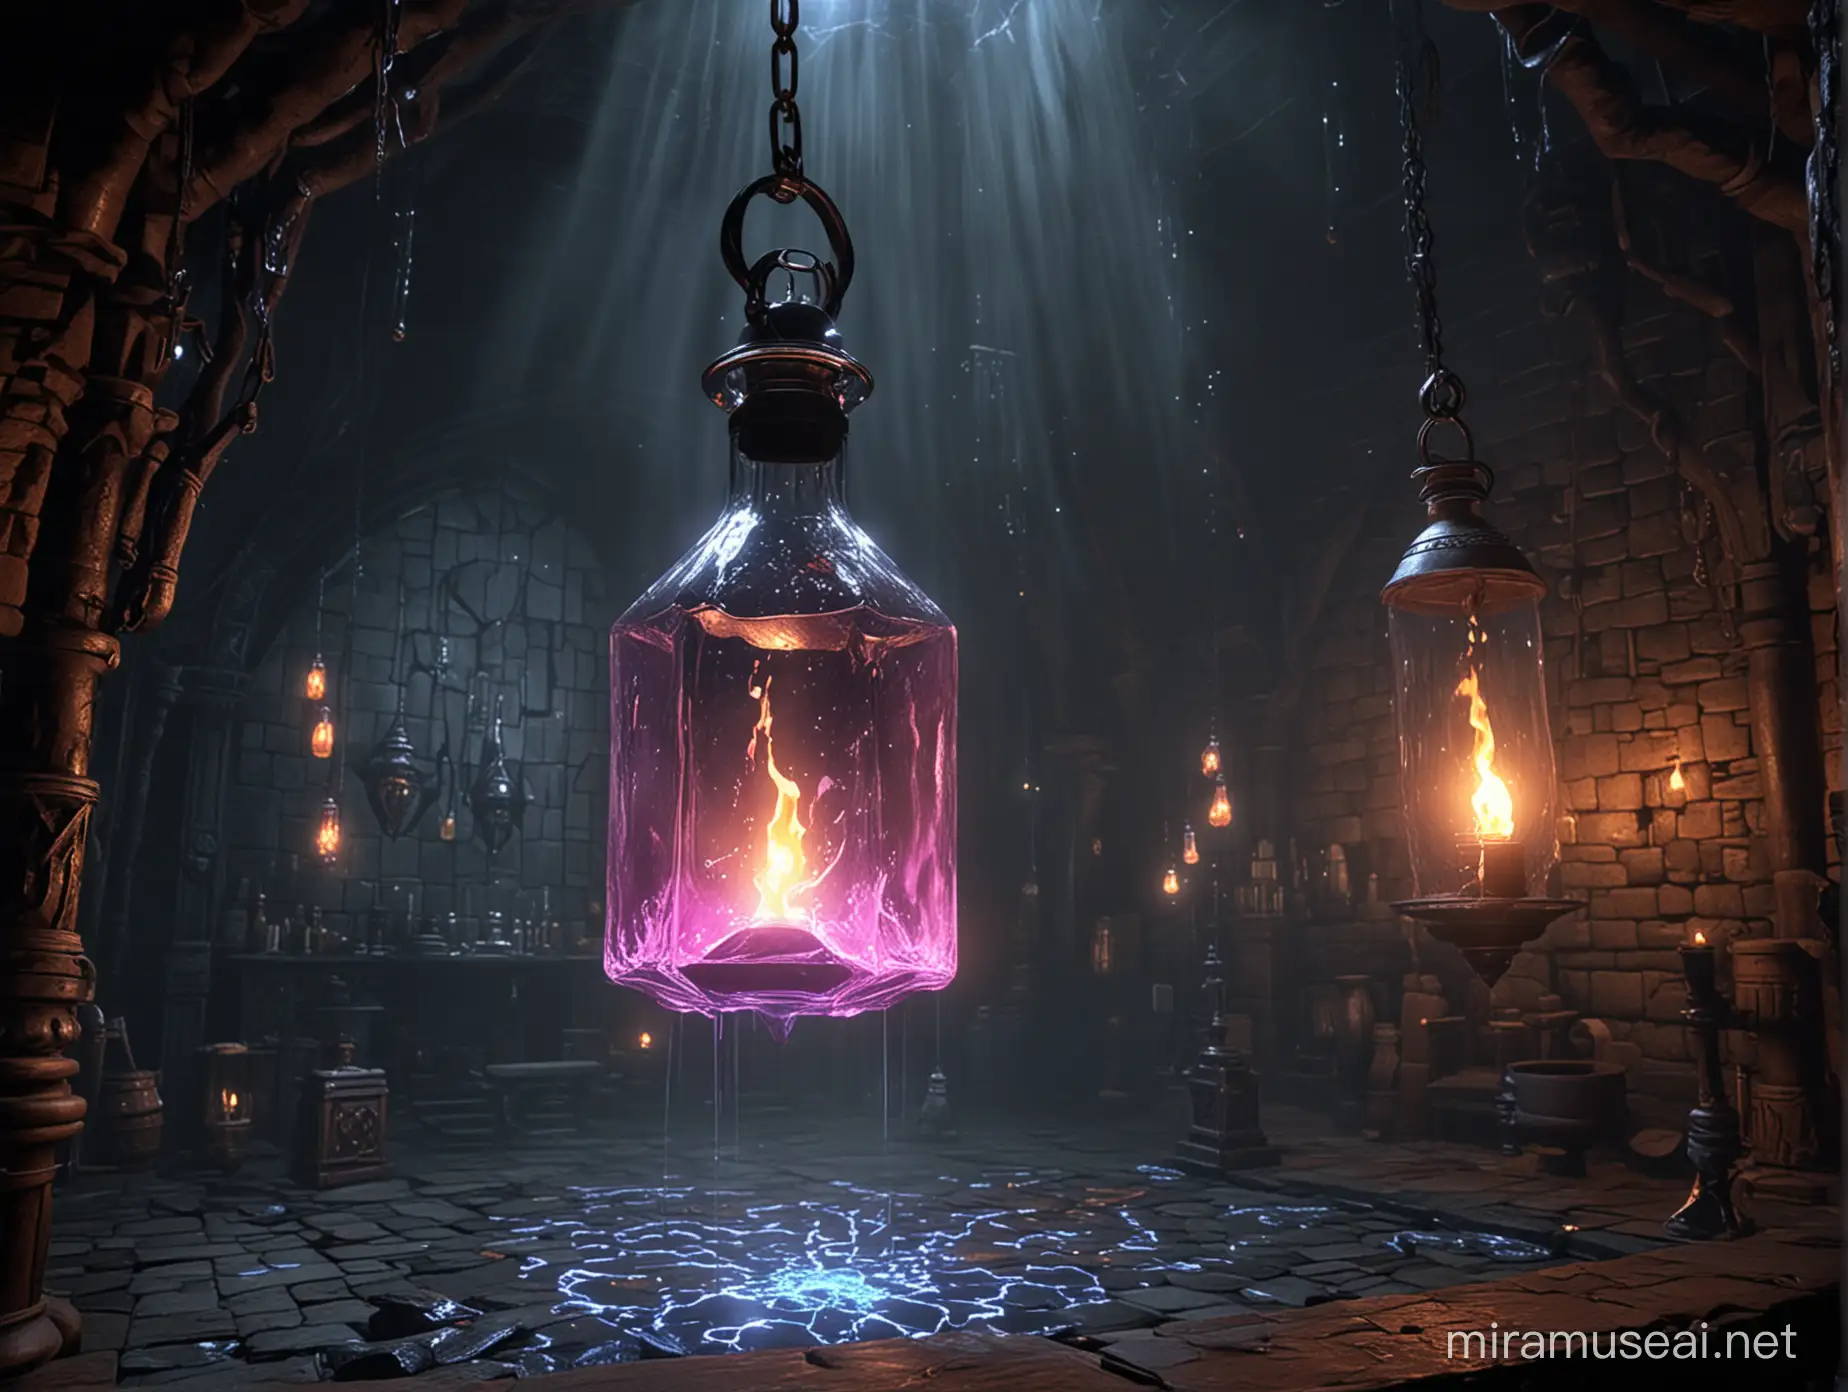 Enchanted Floating Flask with Luminous Potion in a Mystical Setting